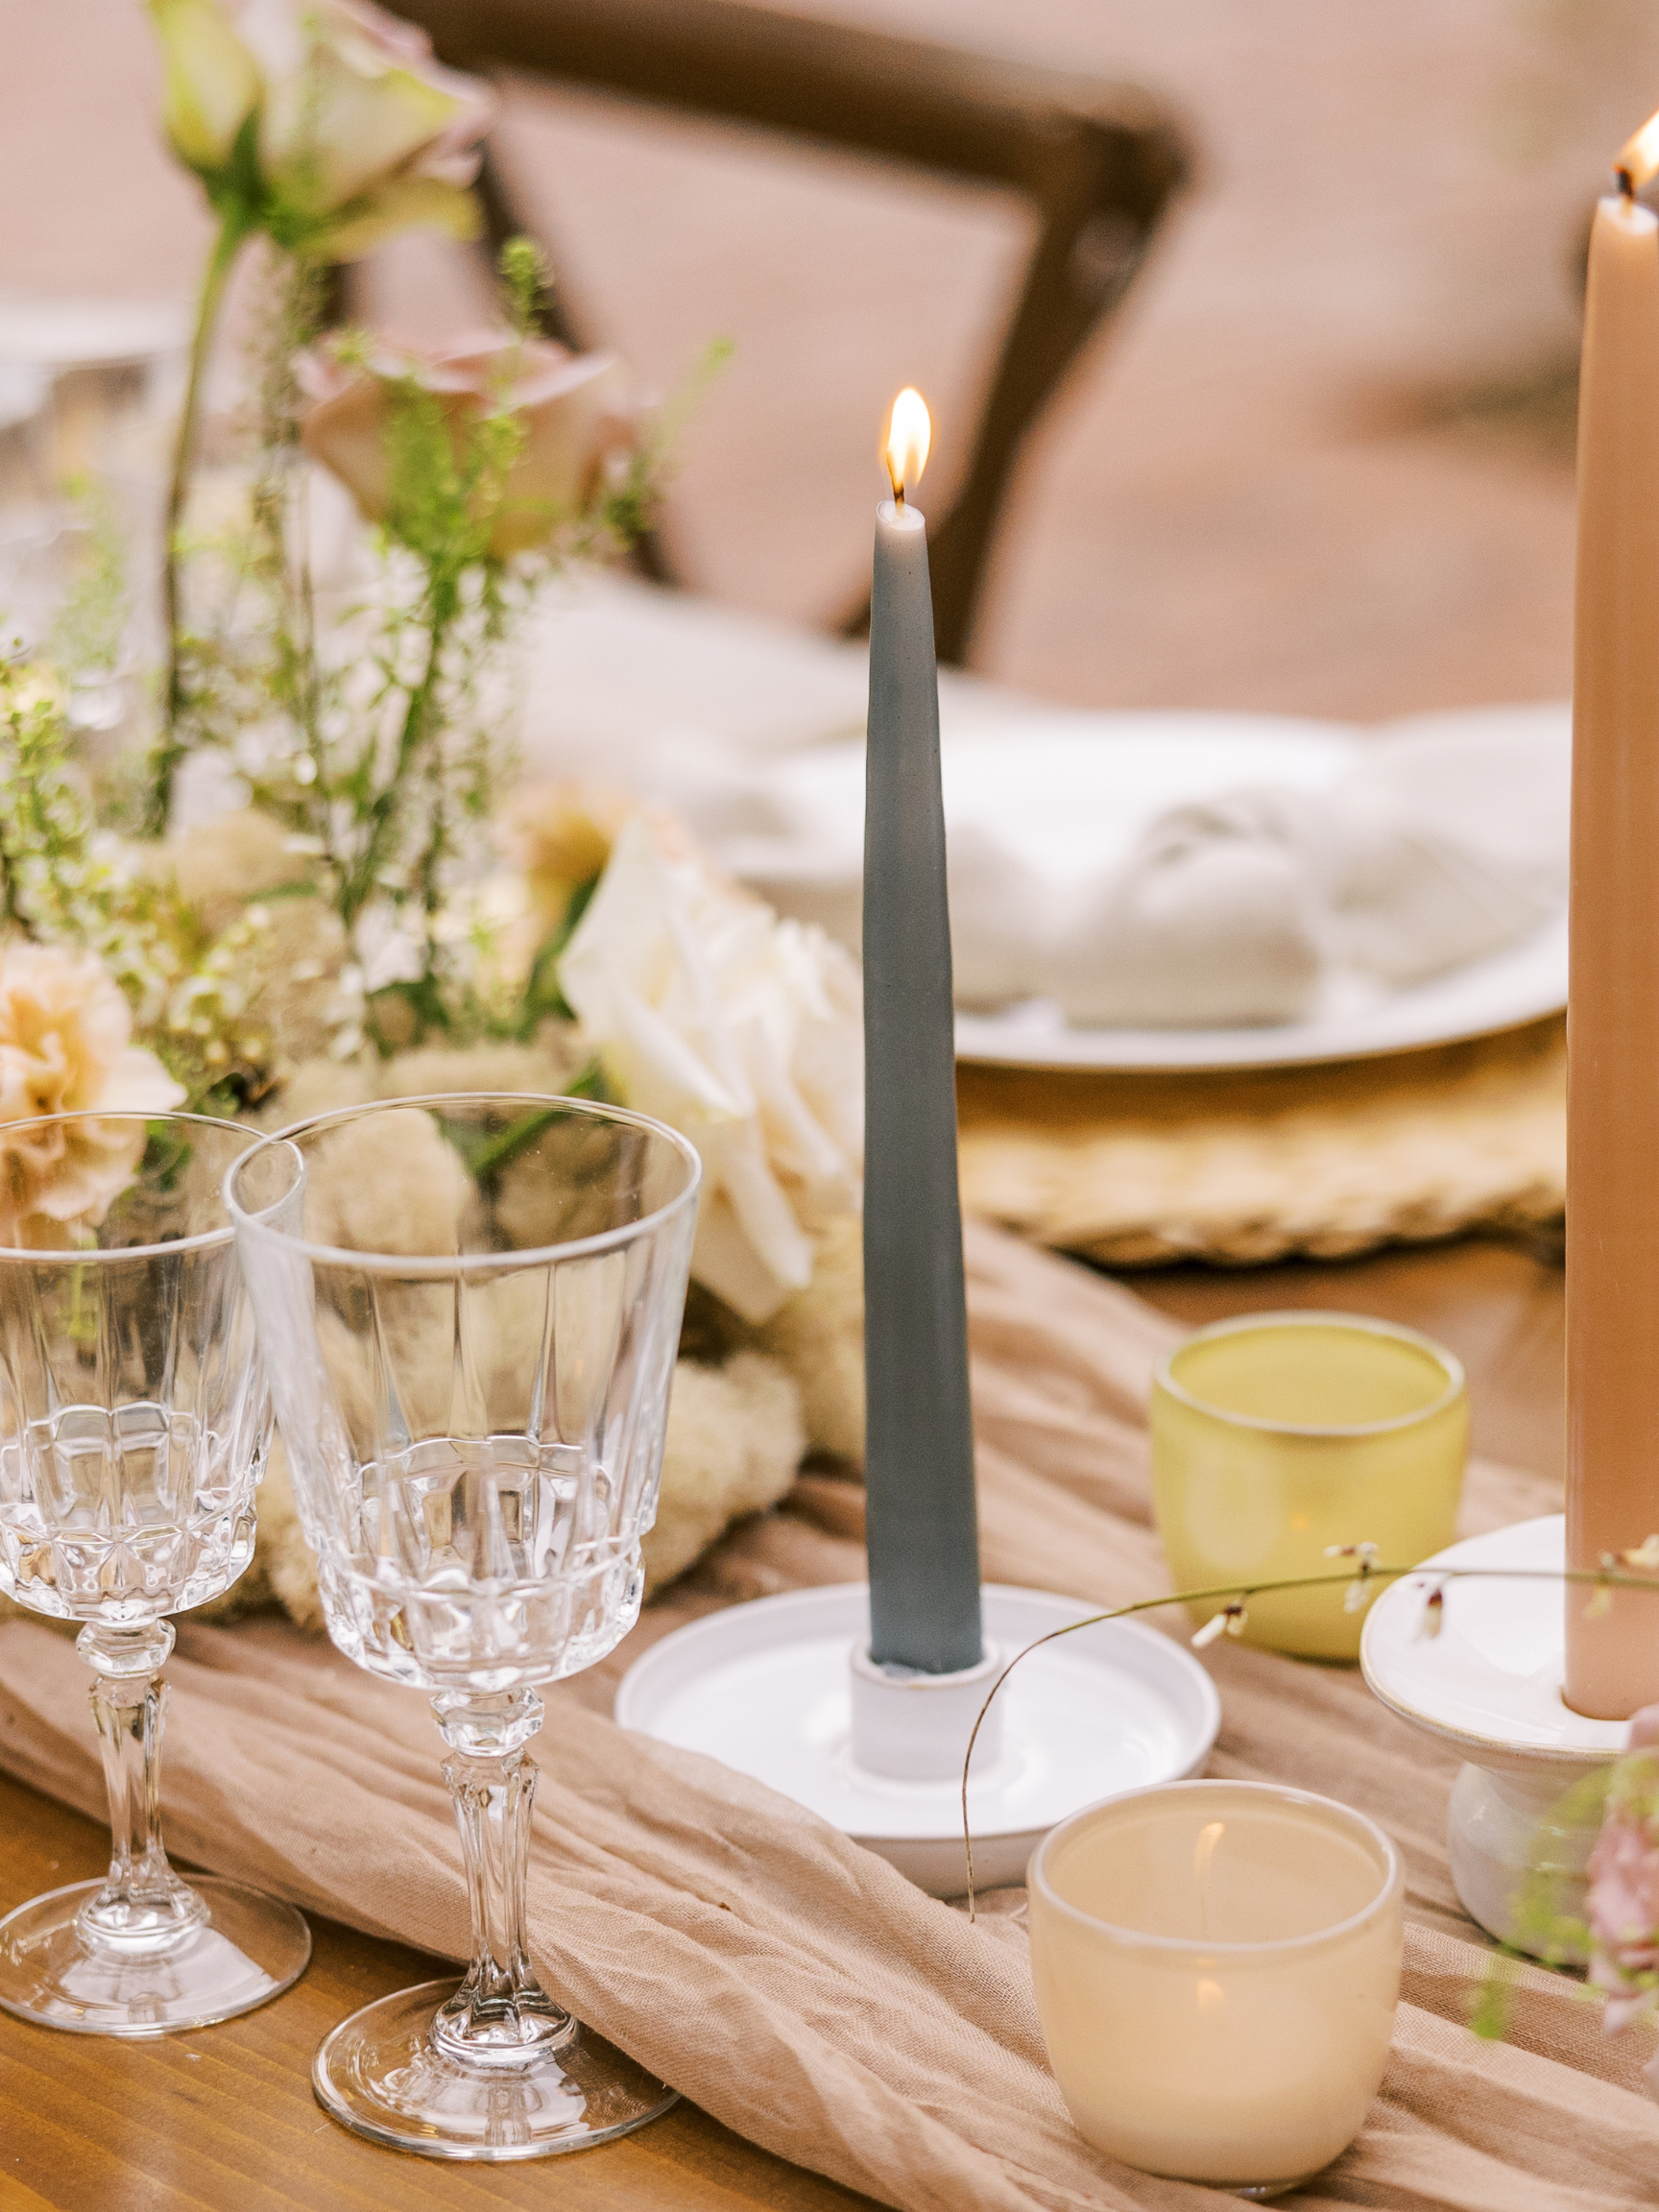 Choose eco-friendly tableware such as reusable glasses and bamboo plates for an Earth-friendly wedding